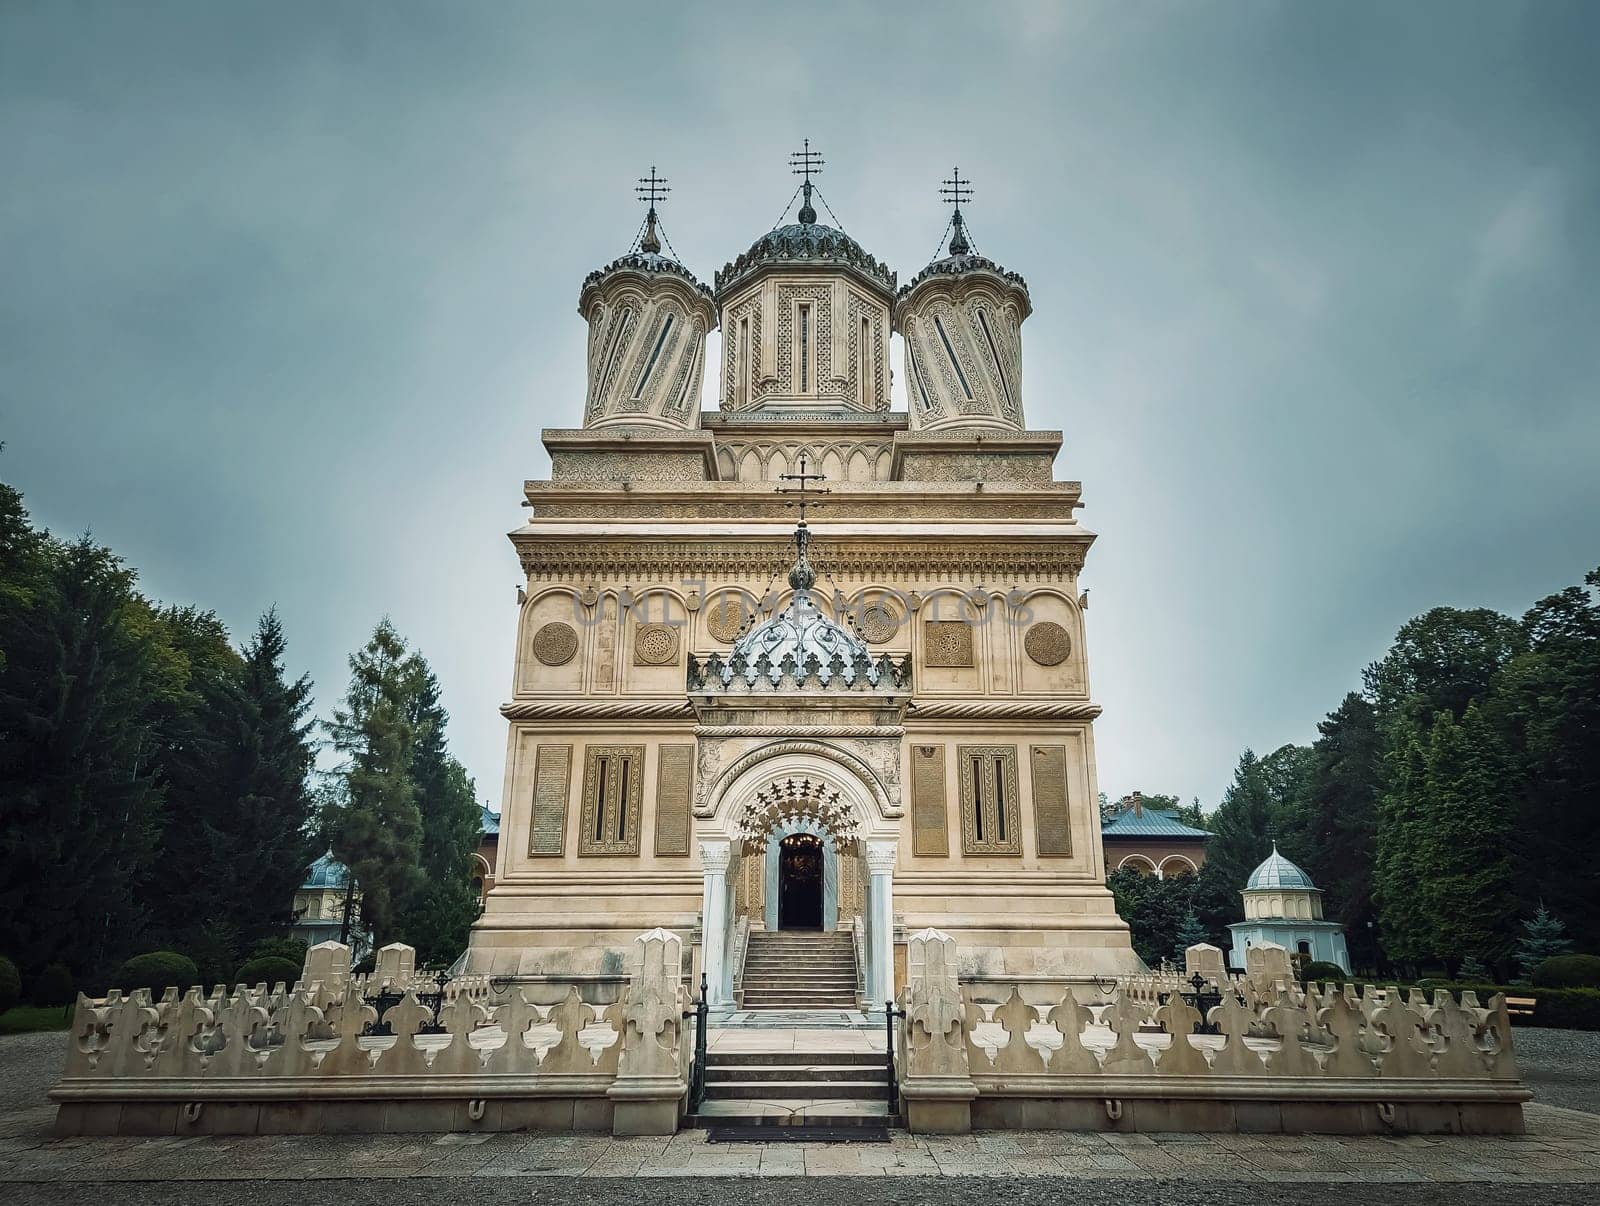 Curtea de Arges old Christian Orthodox monastery in Romania. Beautiful Cathedral facade and architectural details from the legend of Manole craftsman by psychoshadow